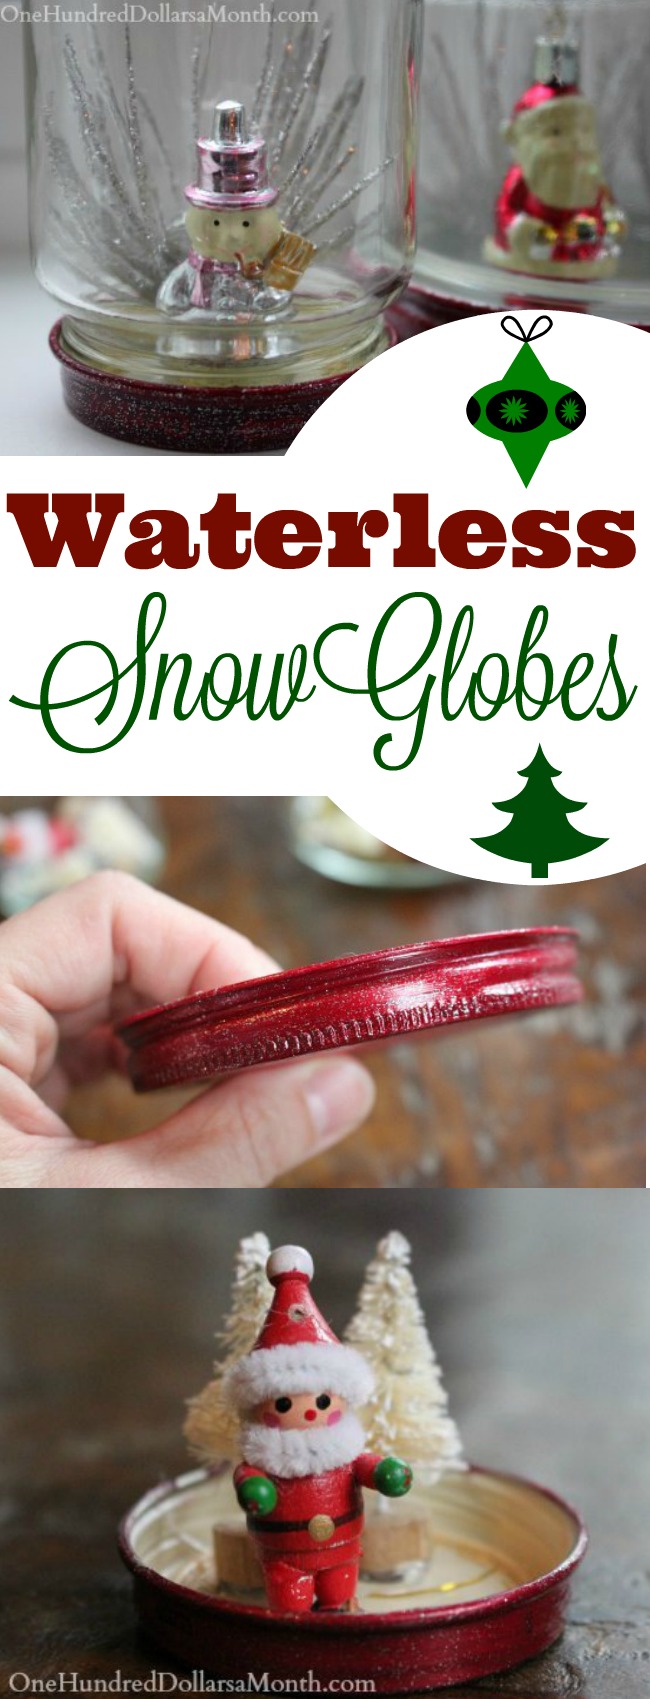 Fun Holiday Craft Idea for Kids – DIY No-Water Snow Globes